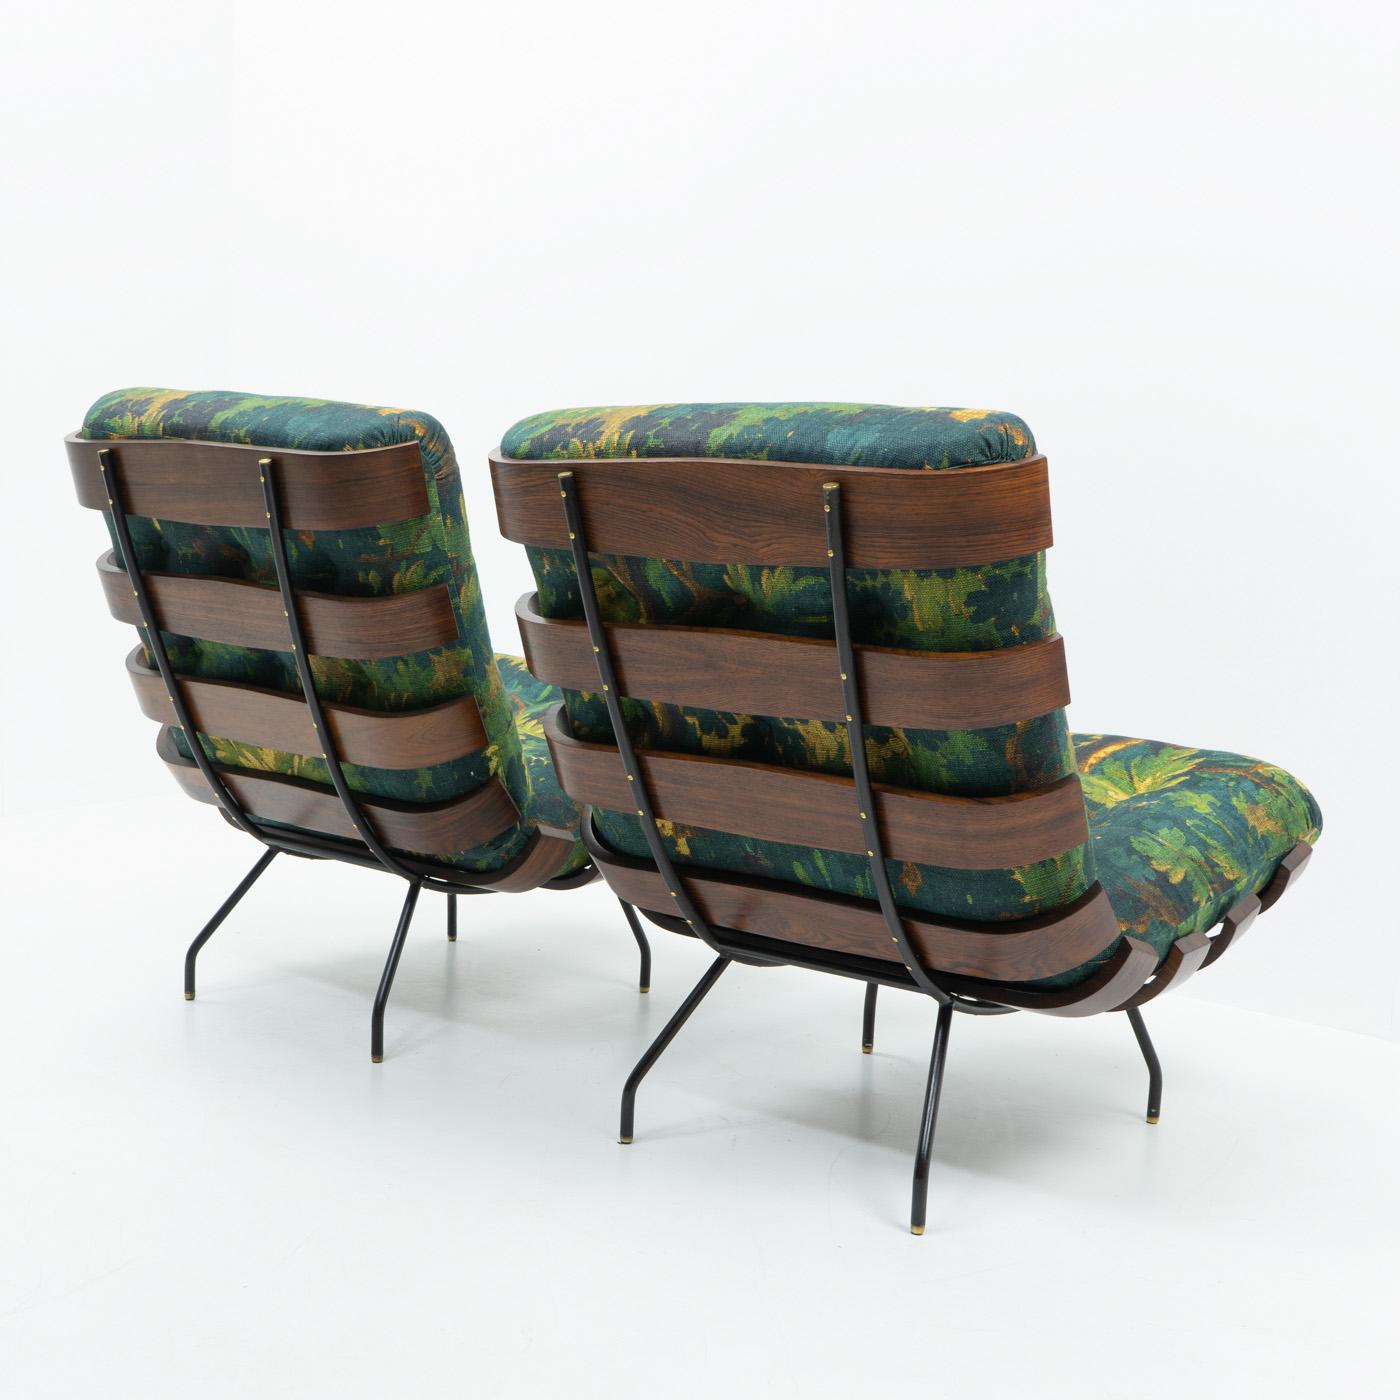 Brazilian Design Costela Lounge Chairs by Hauner & Eisler for Forma, 1950s For Sale 4